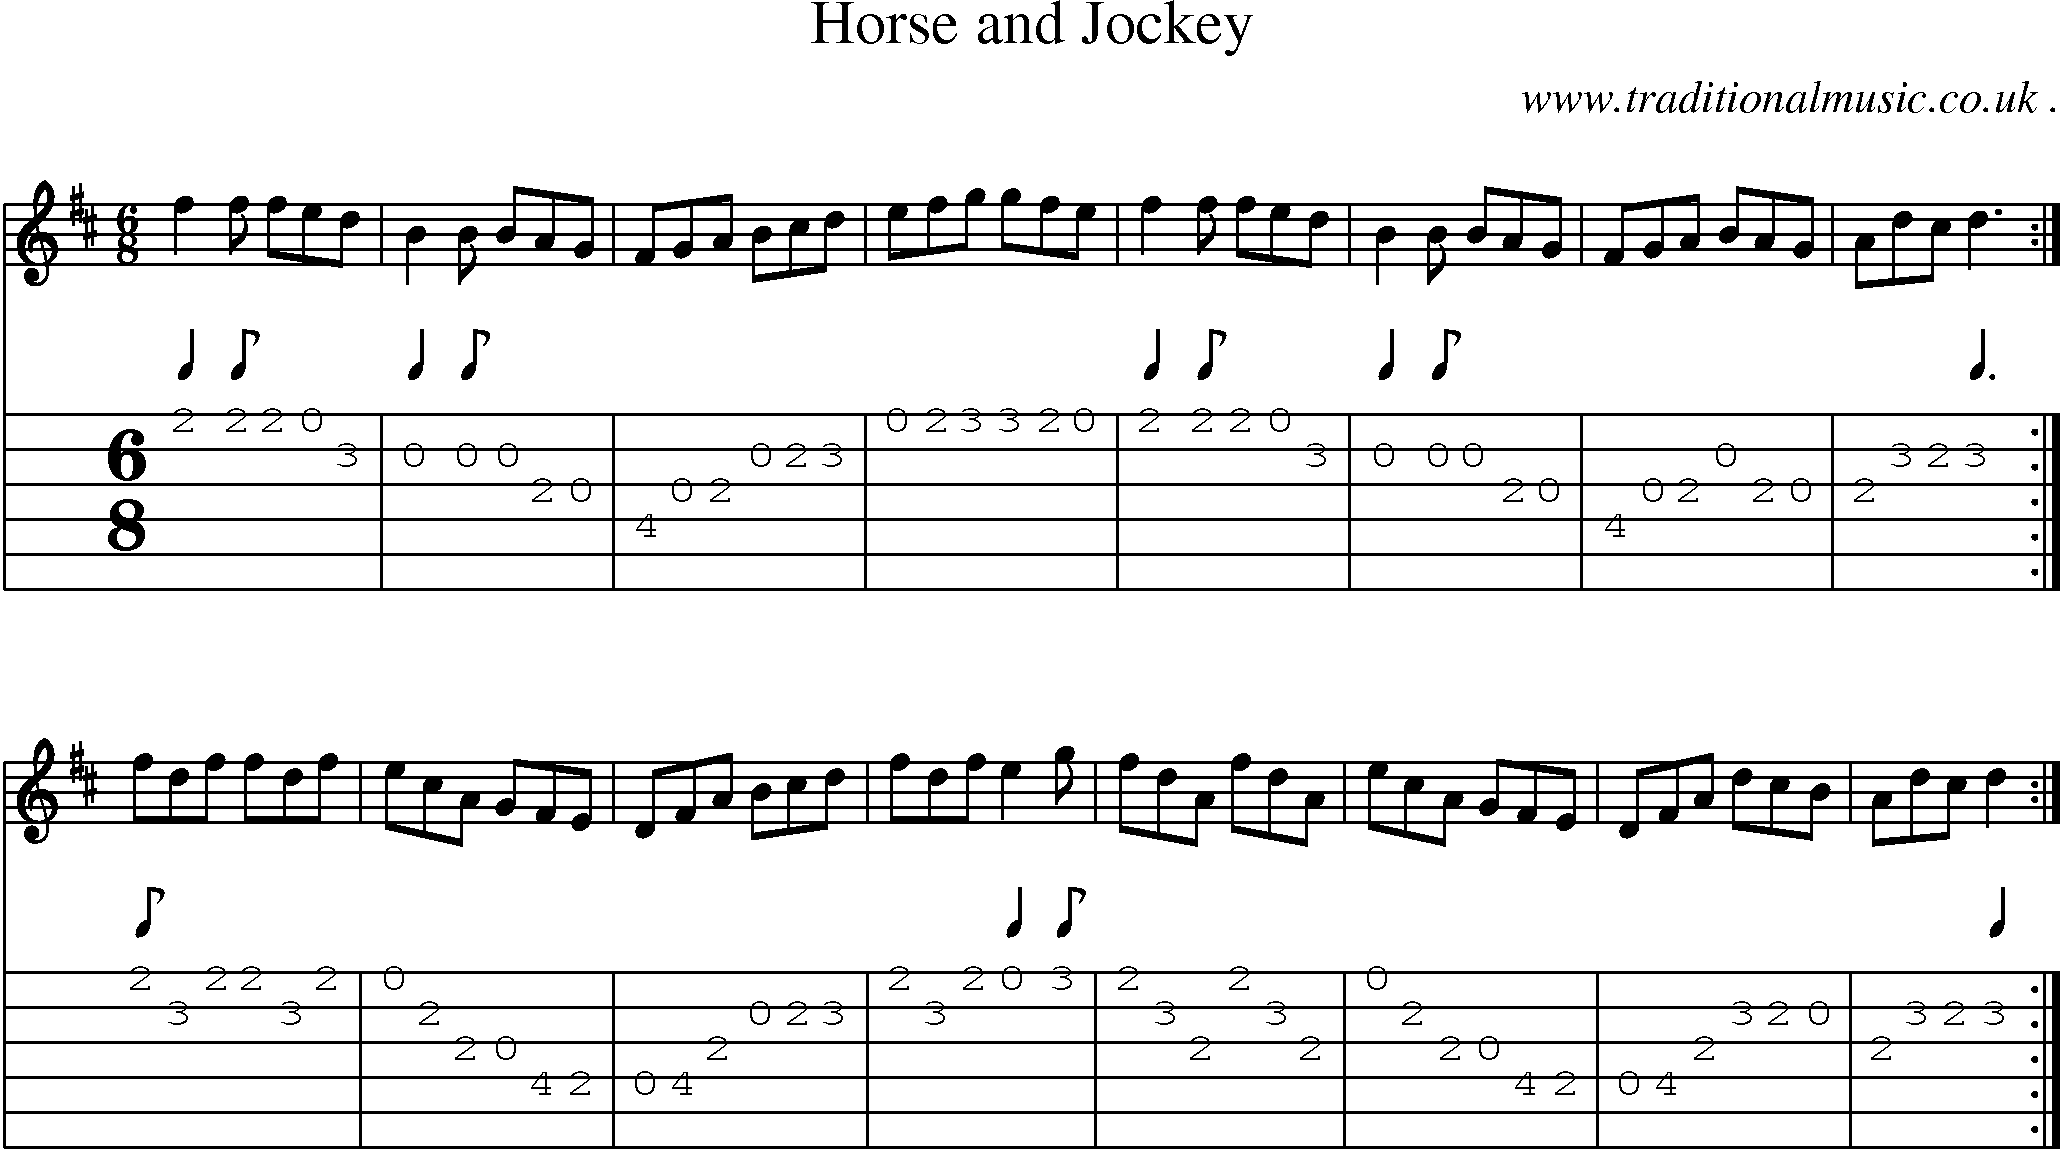 Sheet-Music and Guitar Tabs for Horse And Jockey